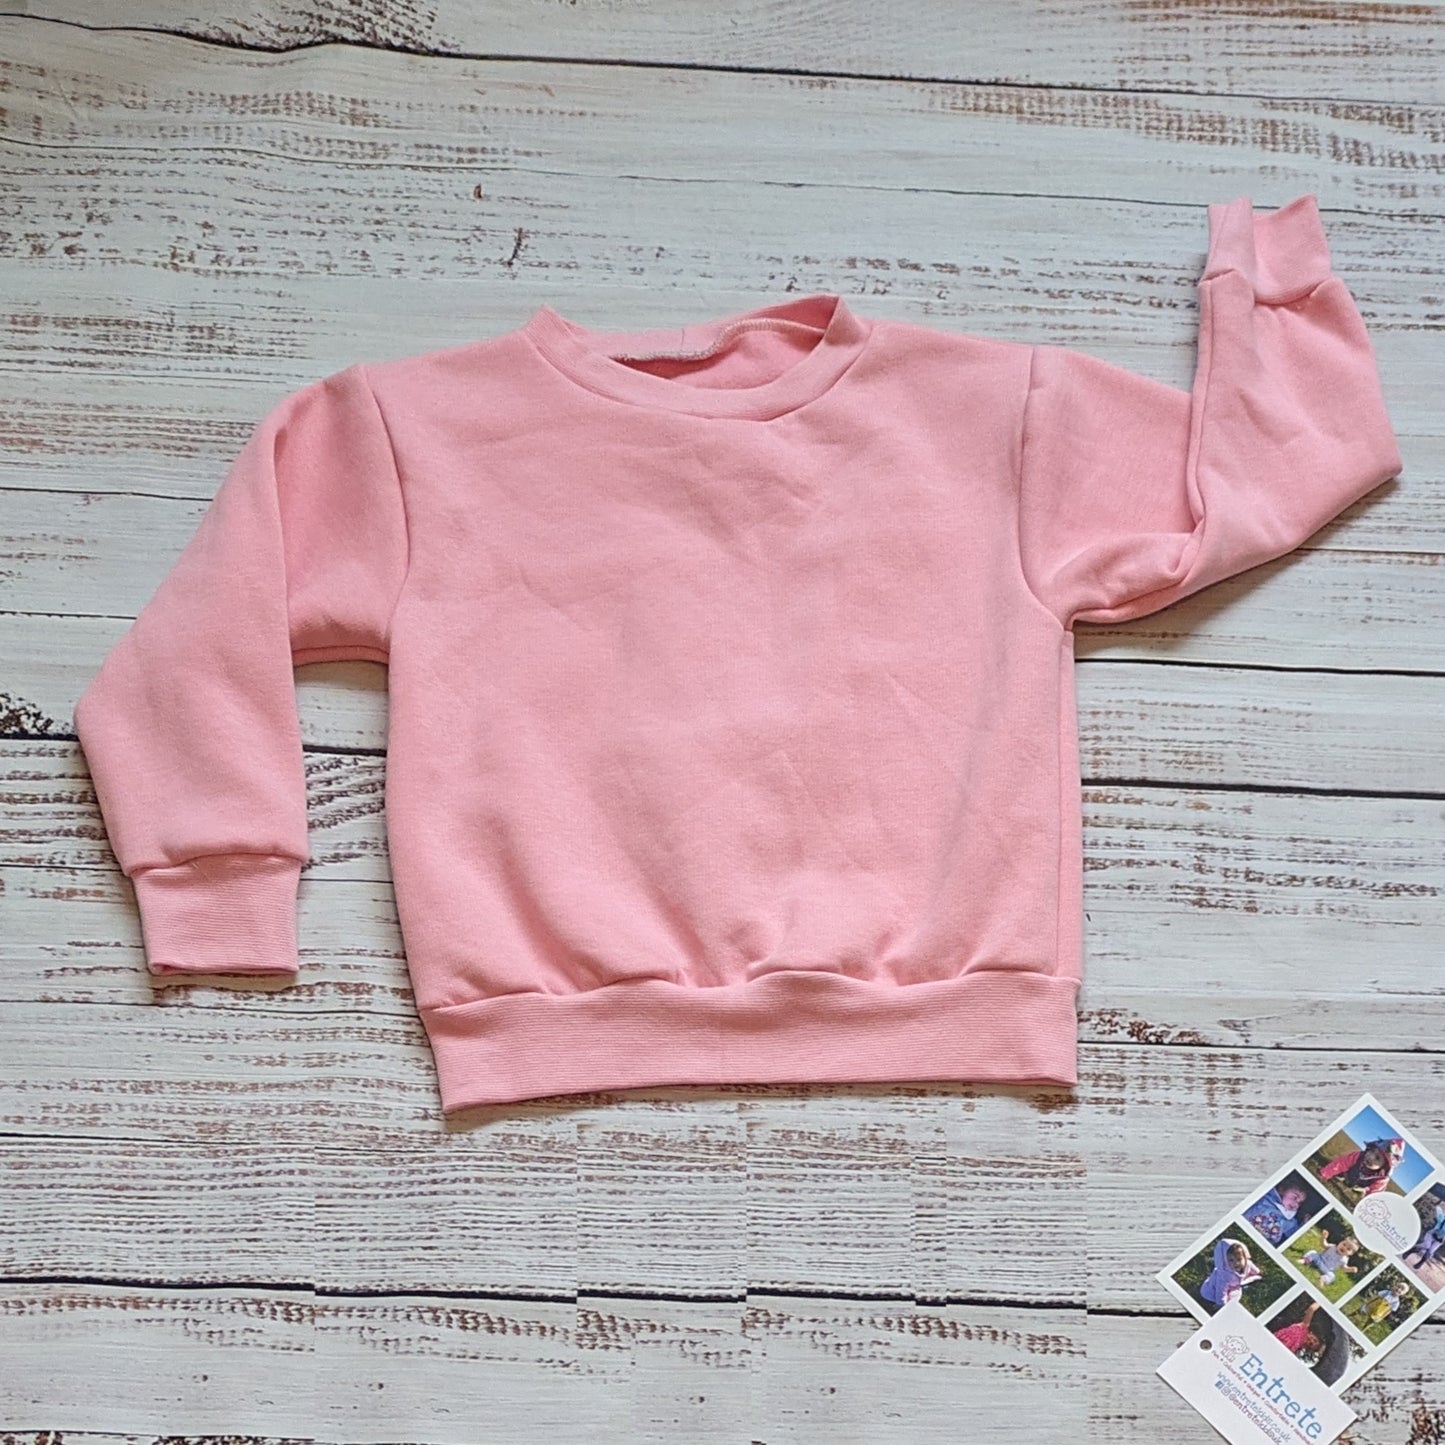 The front of the pink checked happy flowers heart sweatshirt. Showing the pink version.